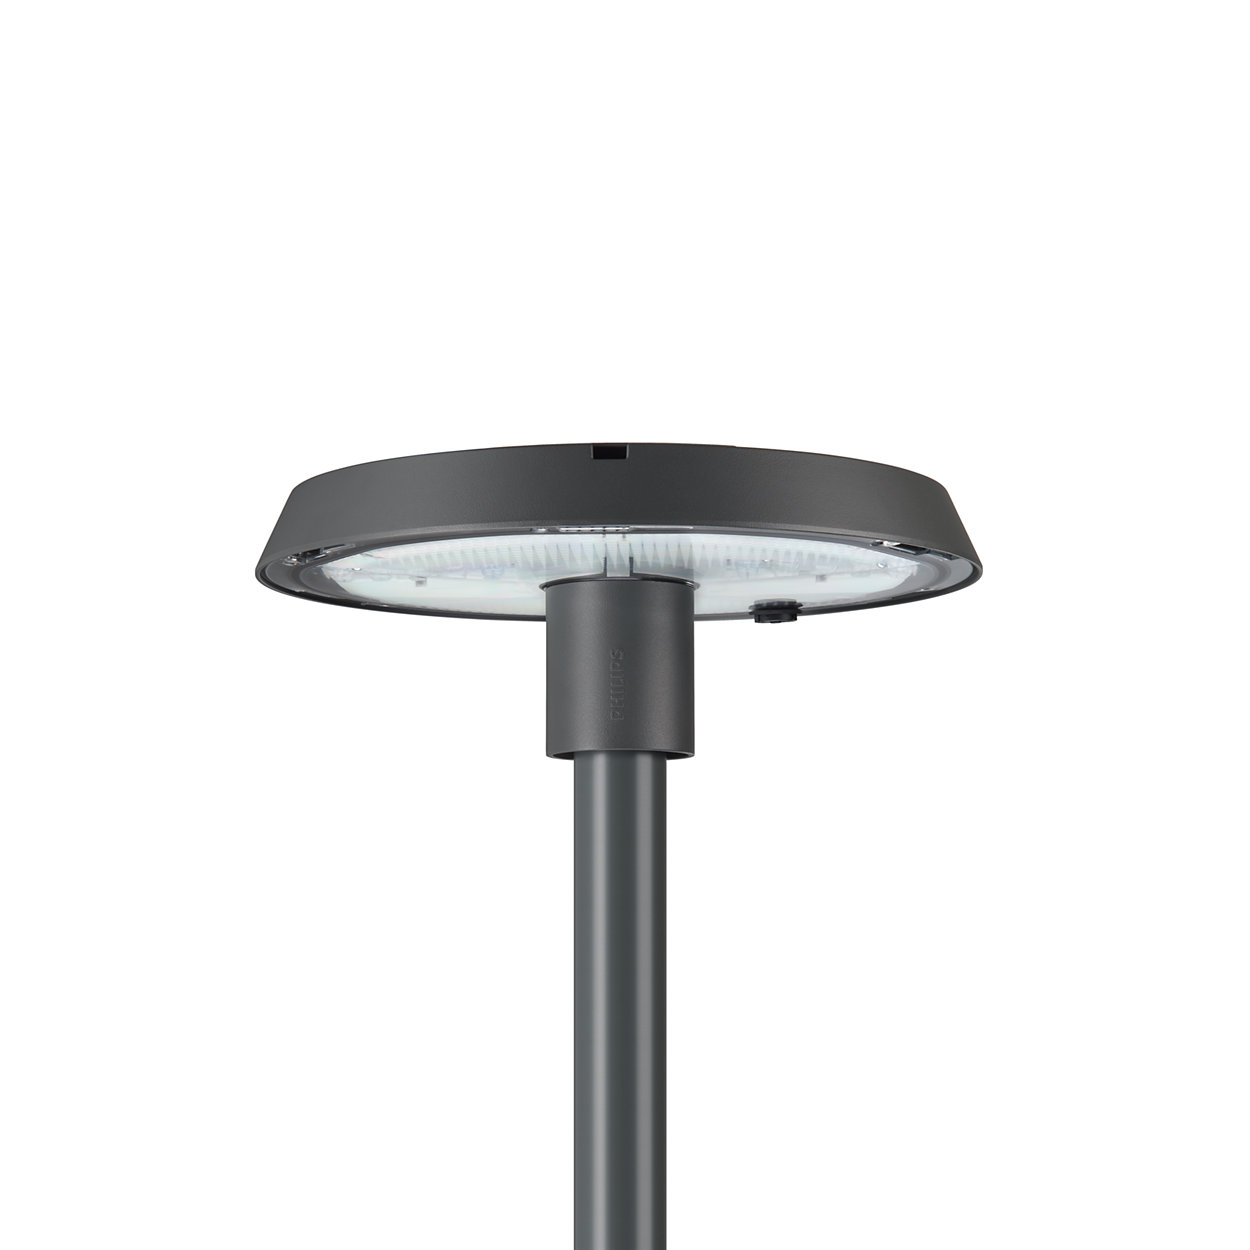 Philips TownTune Central Post Top - Extending the home feel onto the street